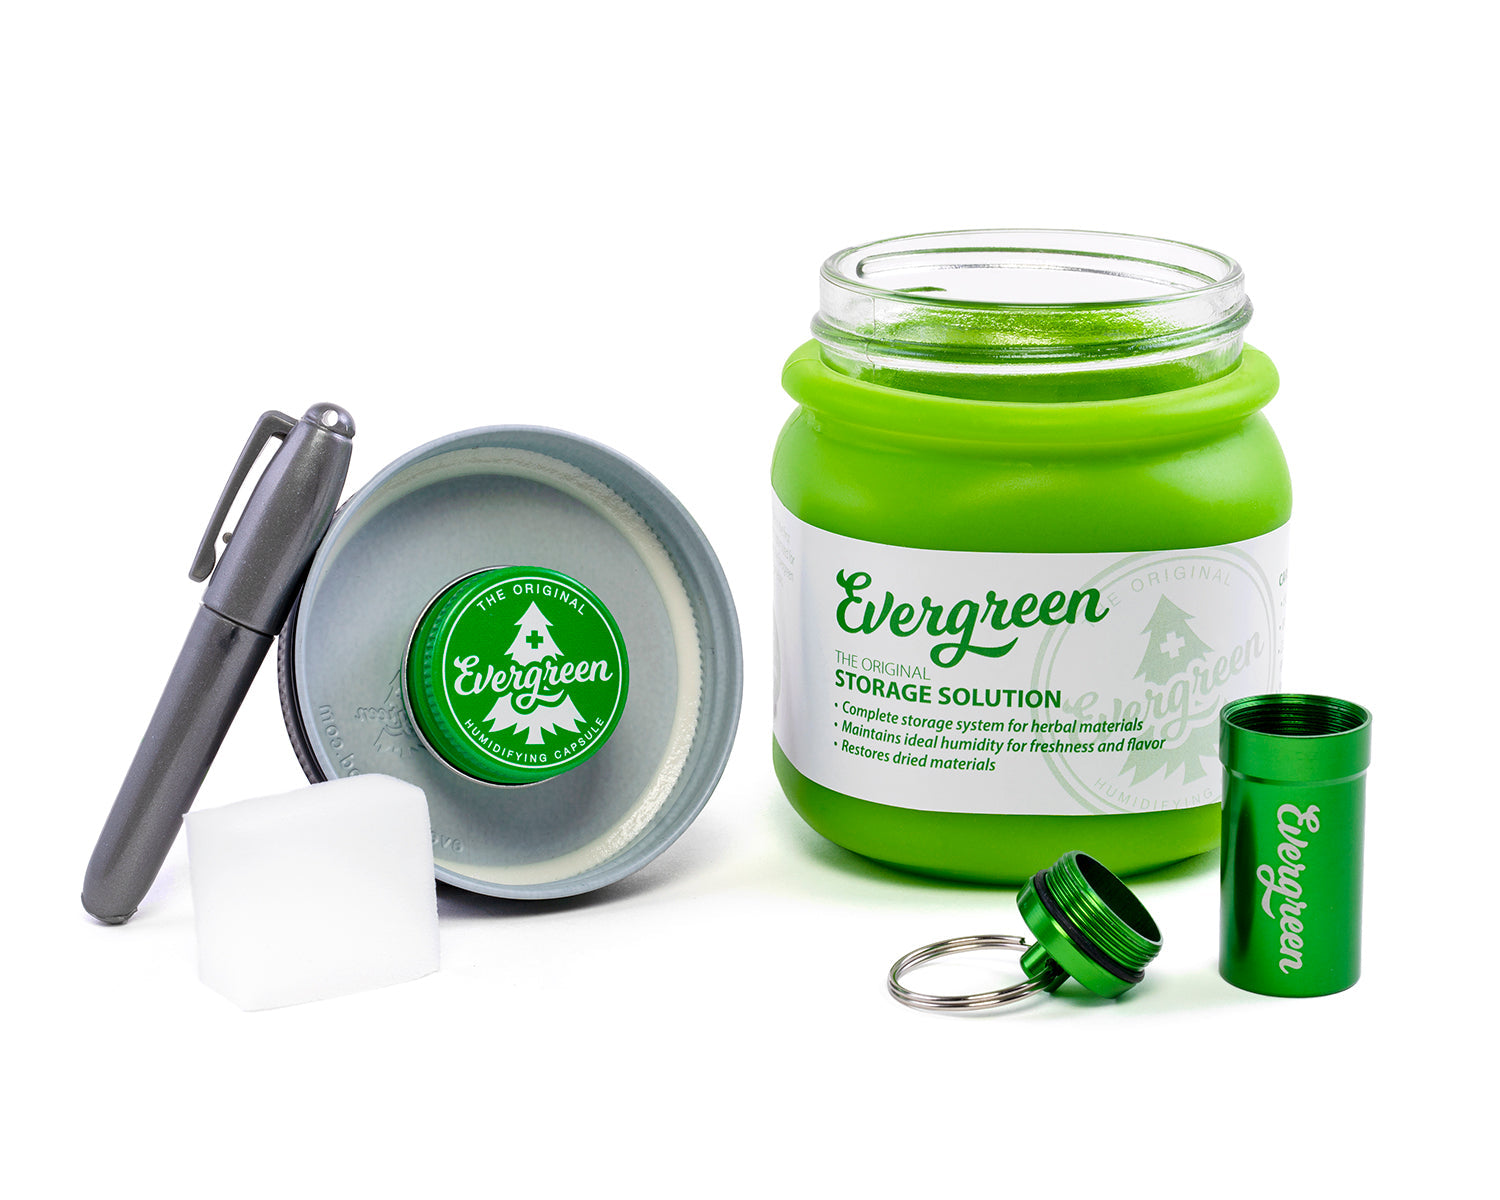 Evergreen Storage Solution open showing contents light green